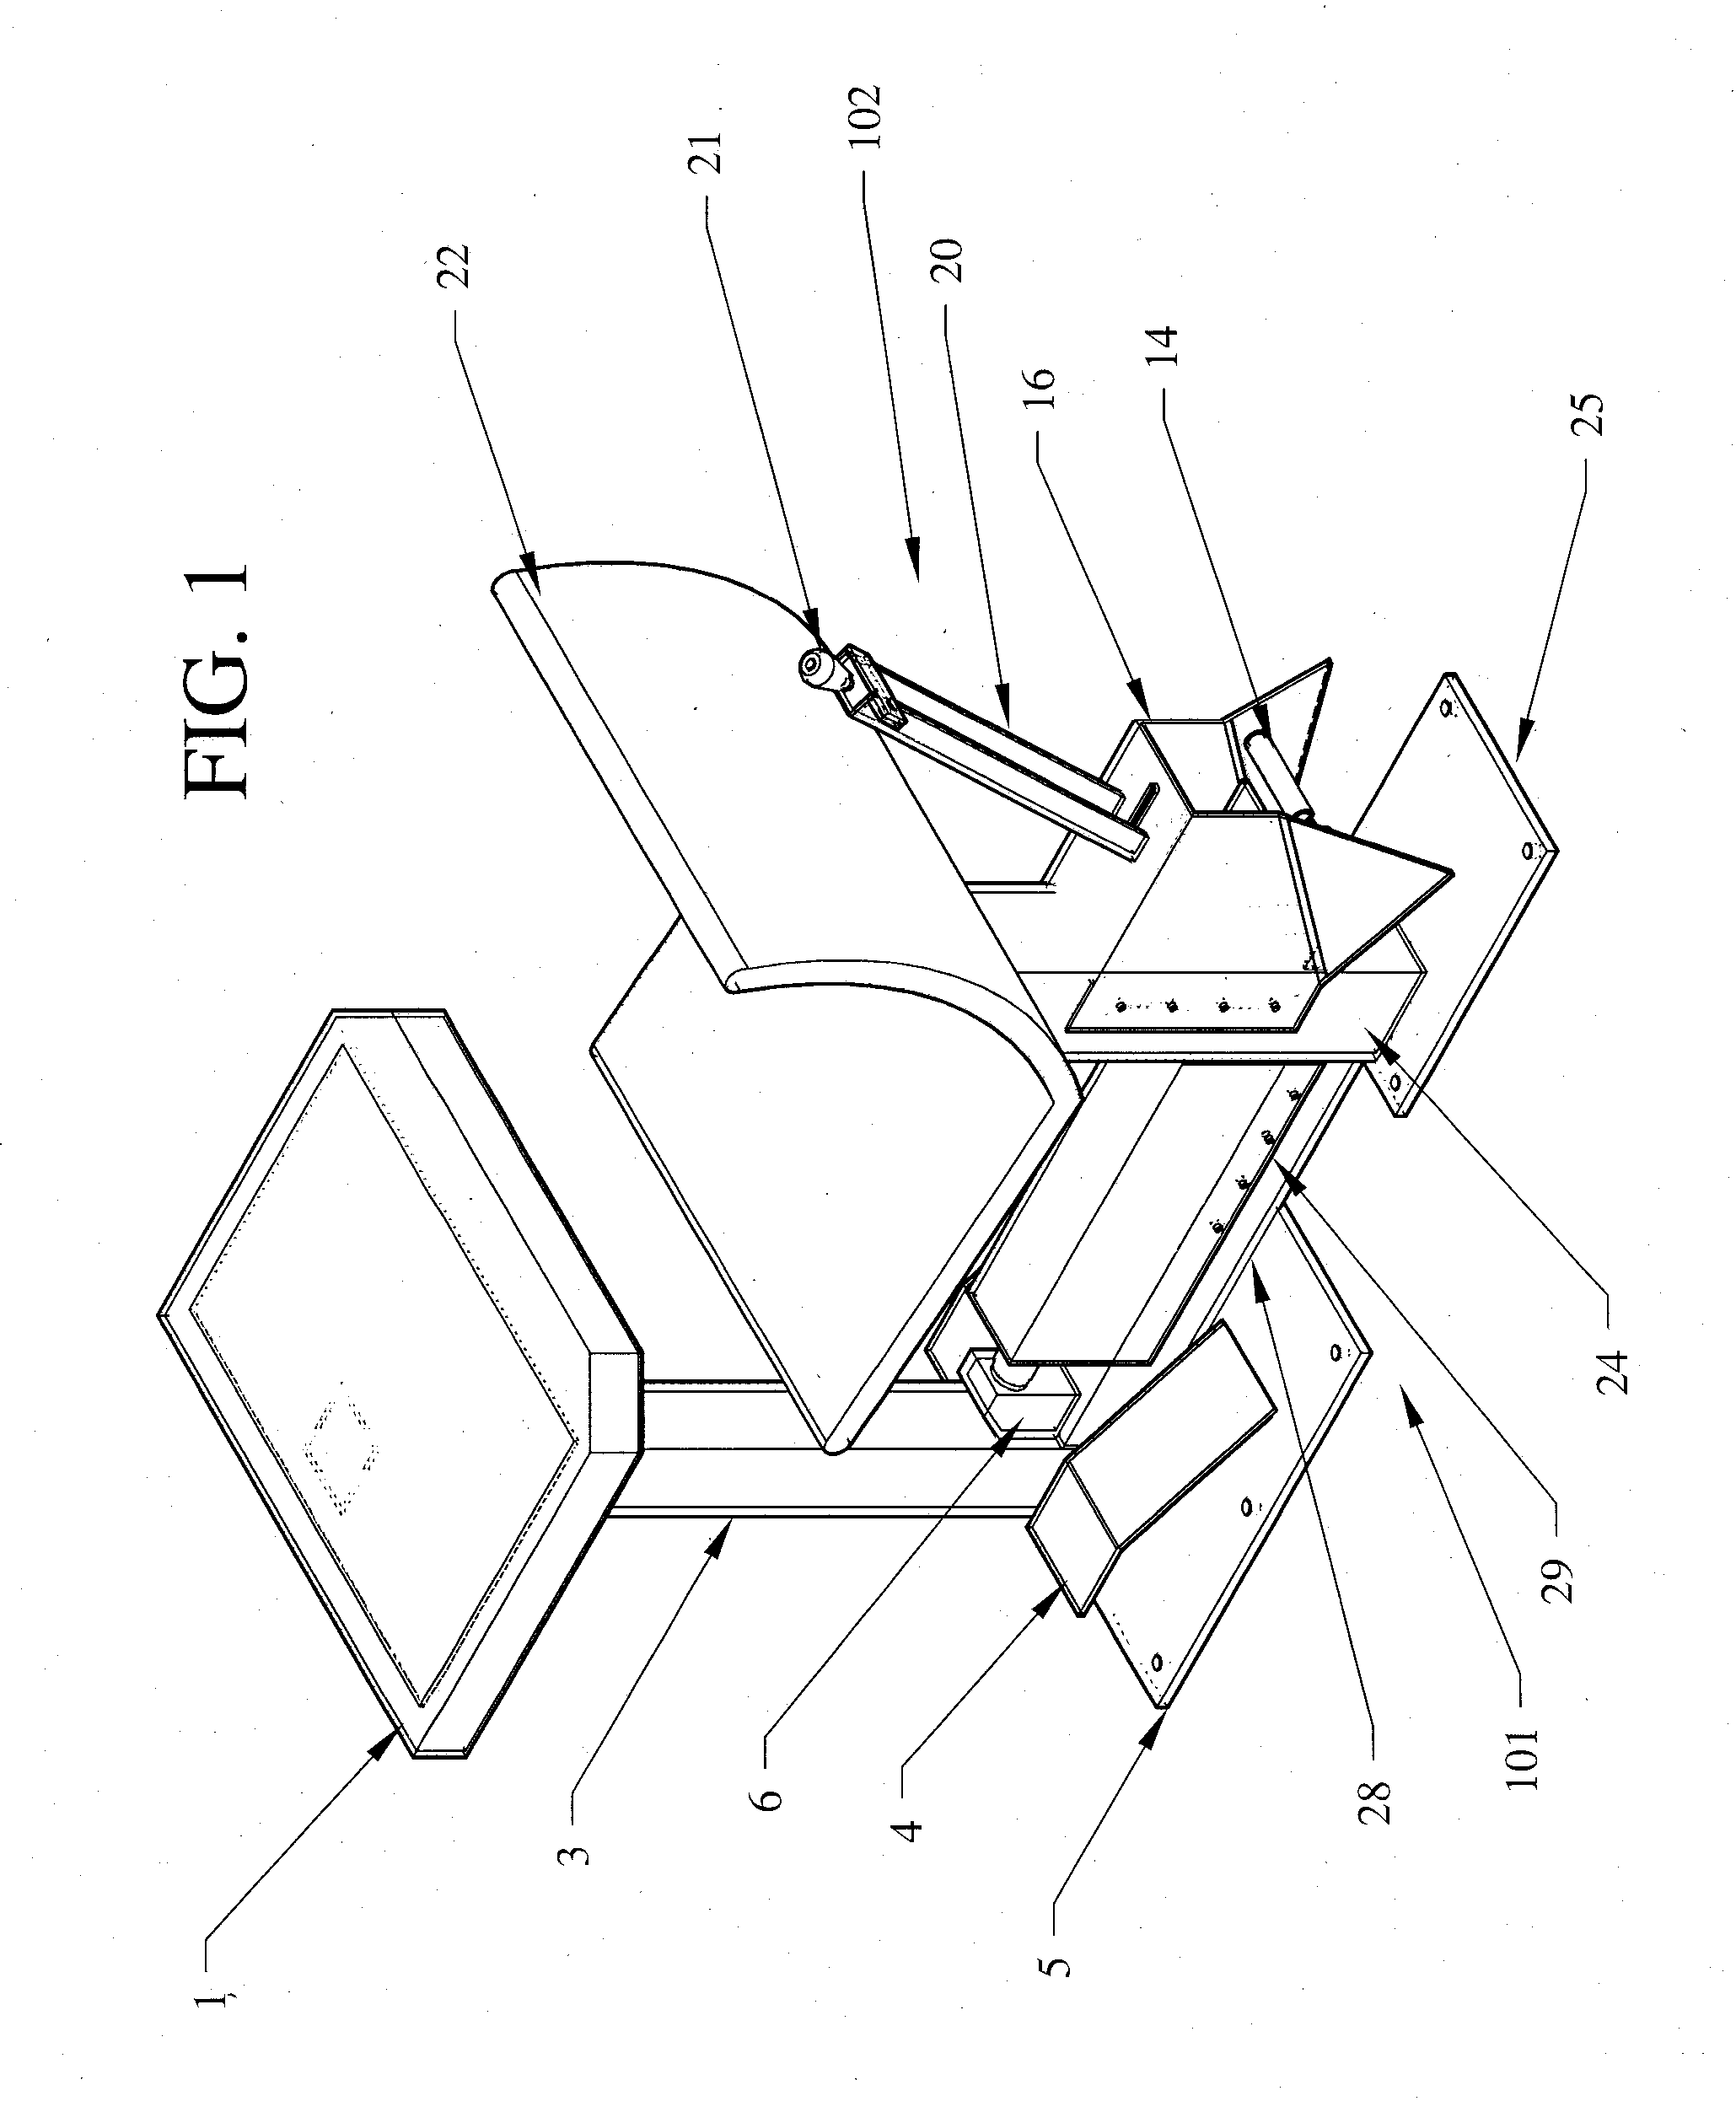 Table and seat restraint apparatus